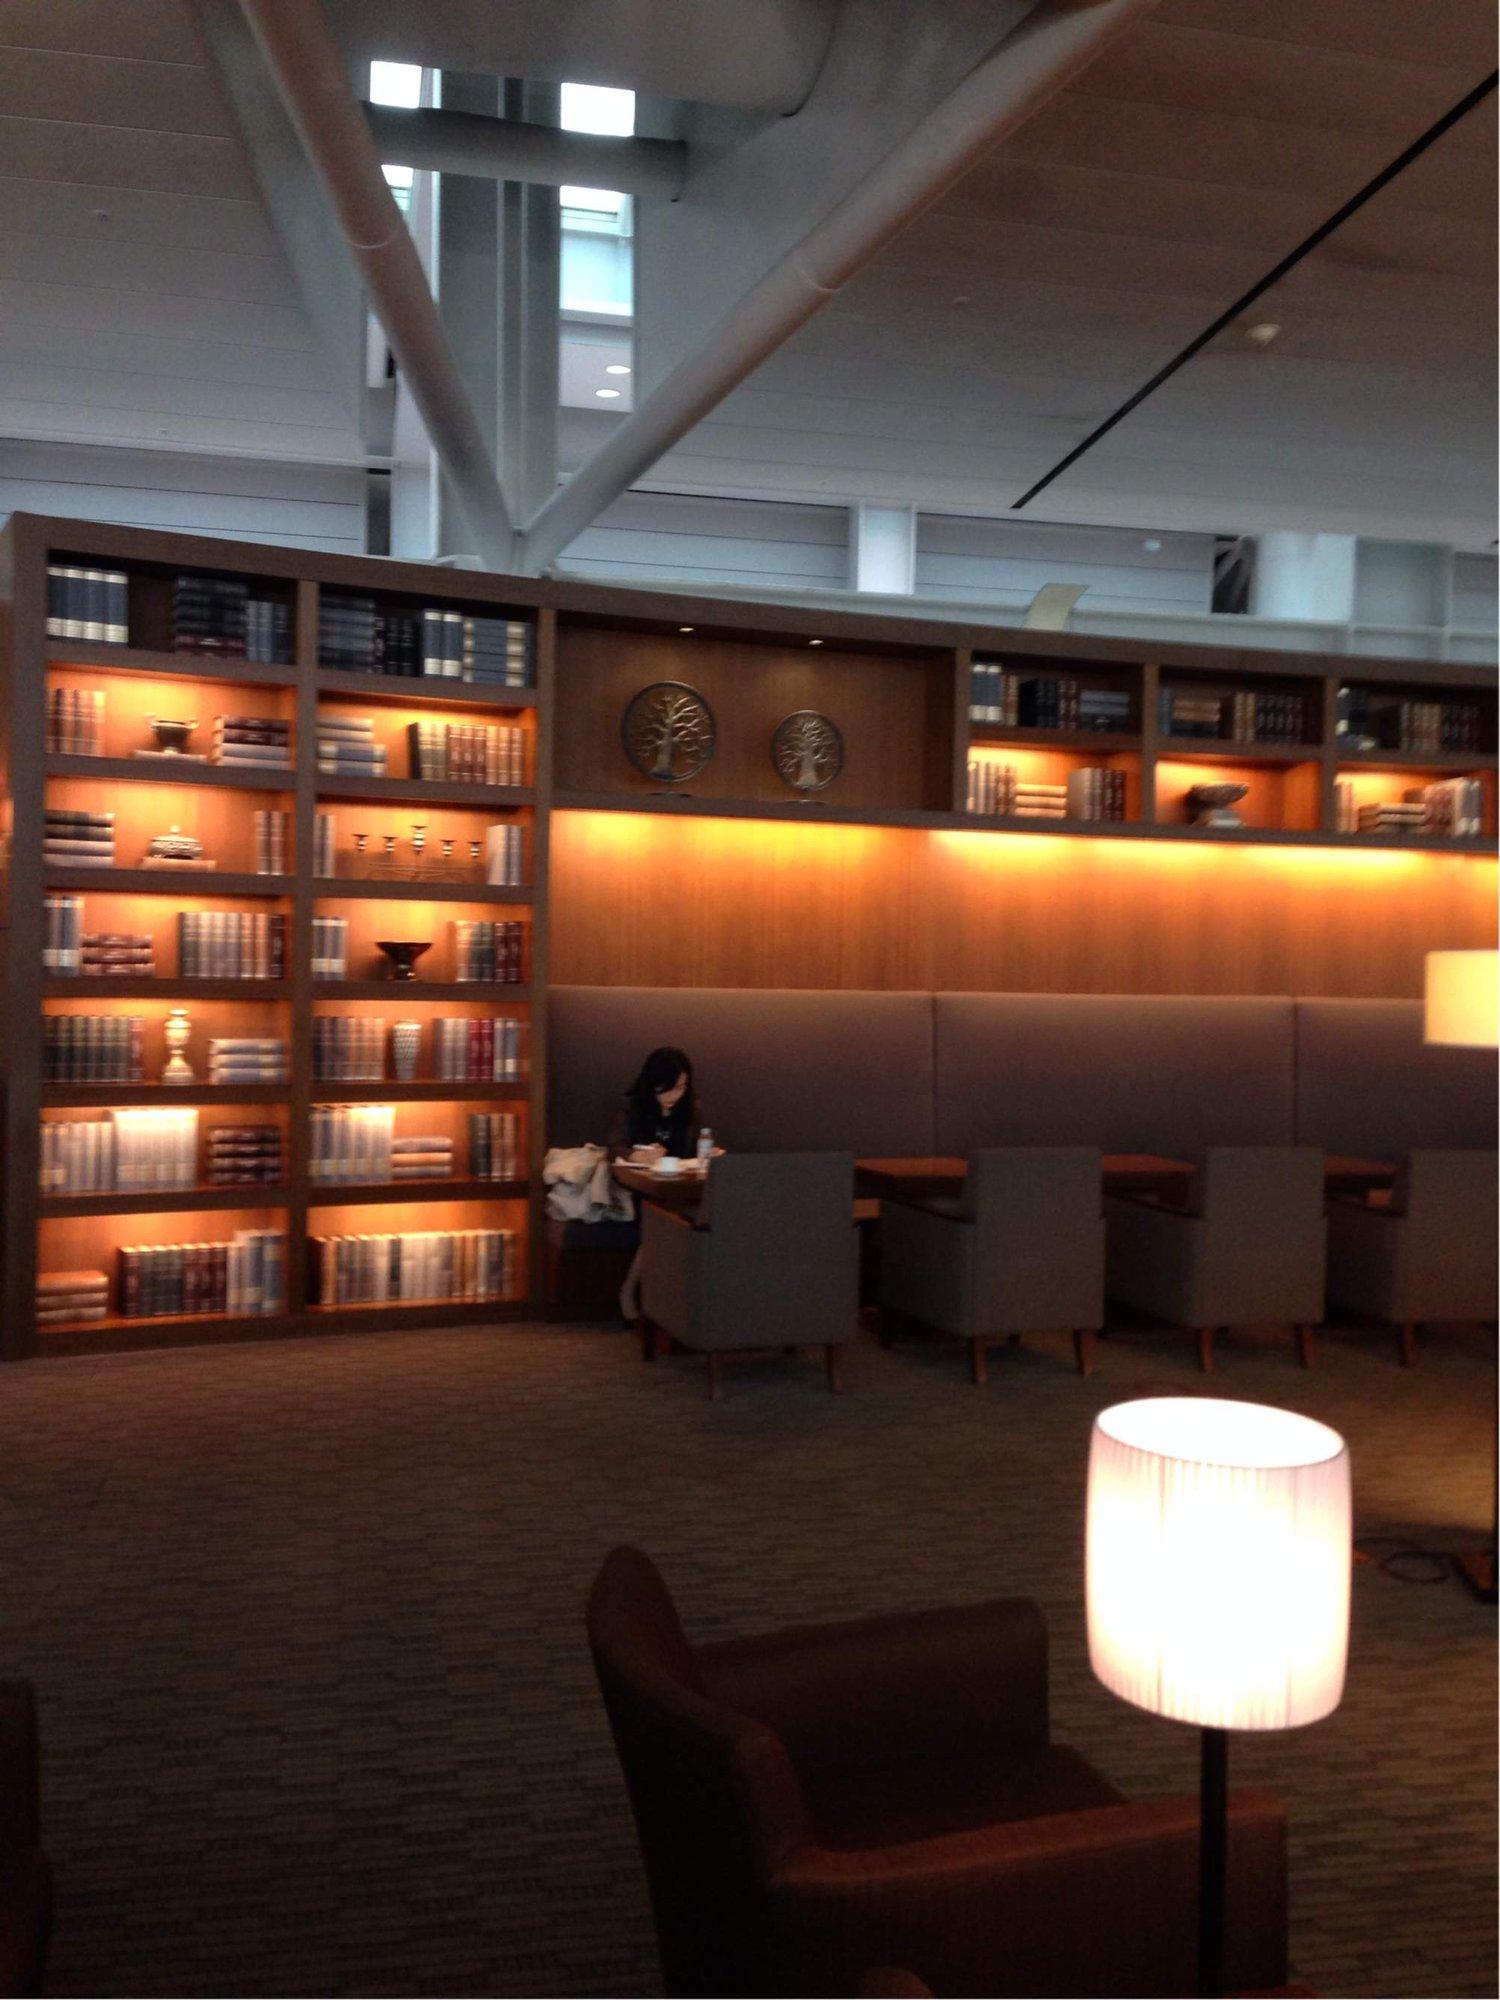 Asiana Airlines Business Class Lounge (East) image 21 of 59